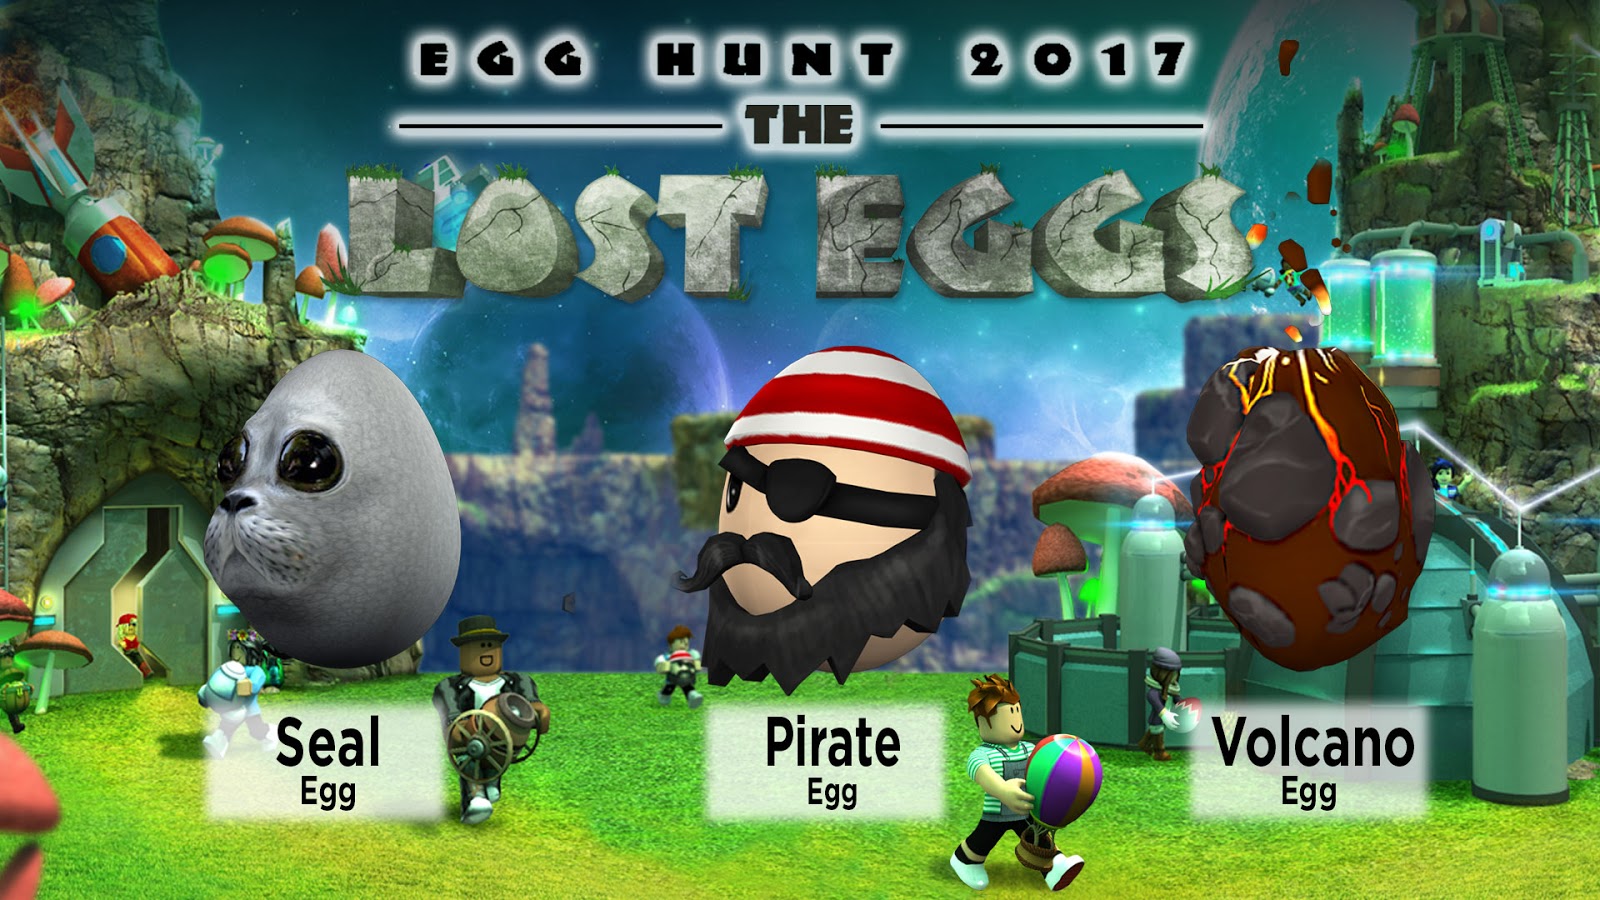 Giveaway Roblox Egg Hunt Prize Pack Mommy Katie - cloud village headband roblox